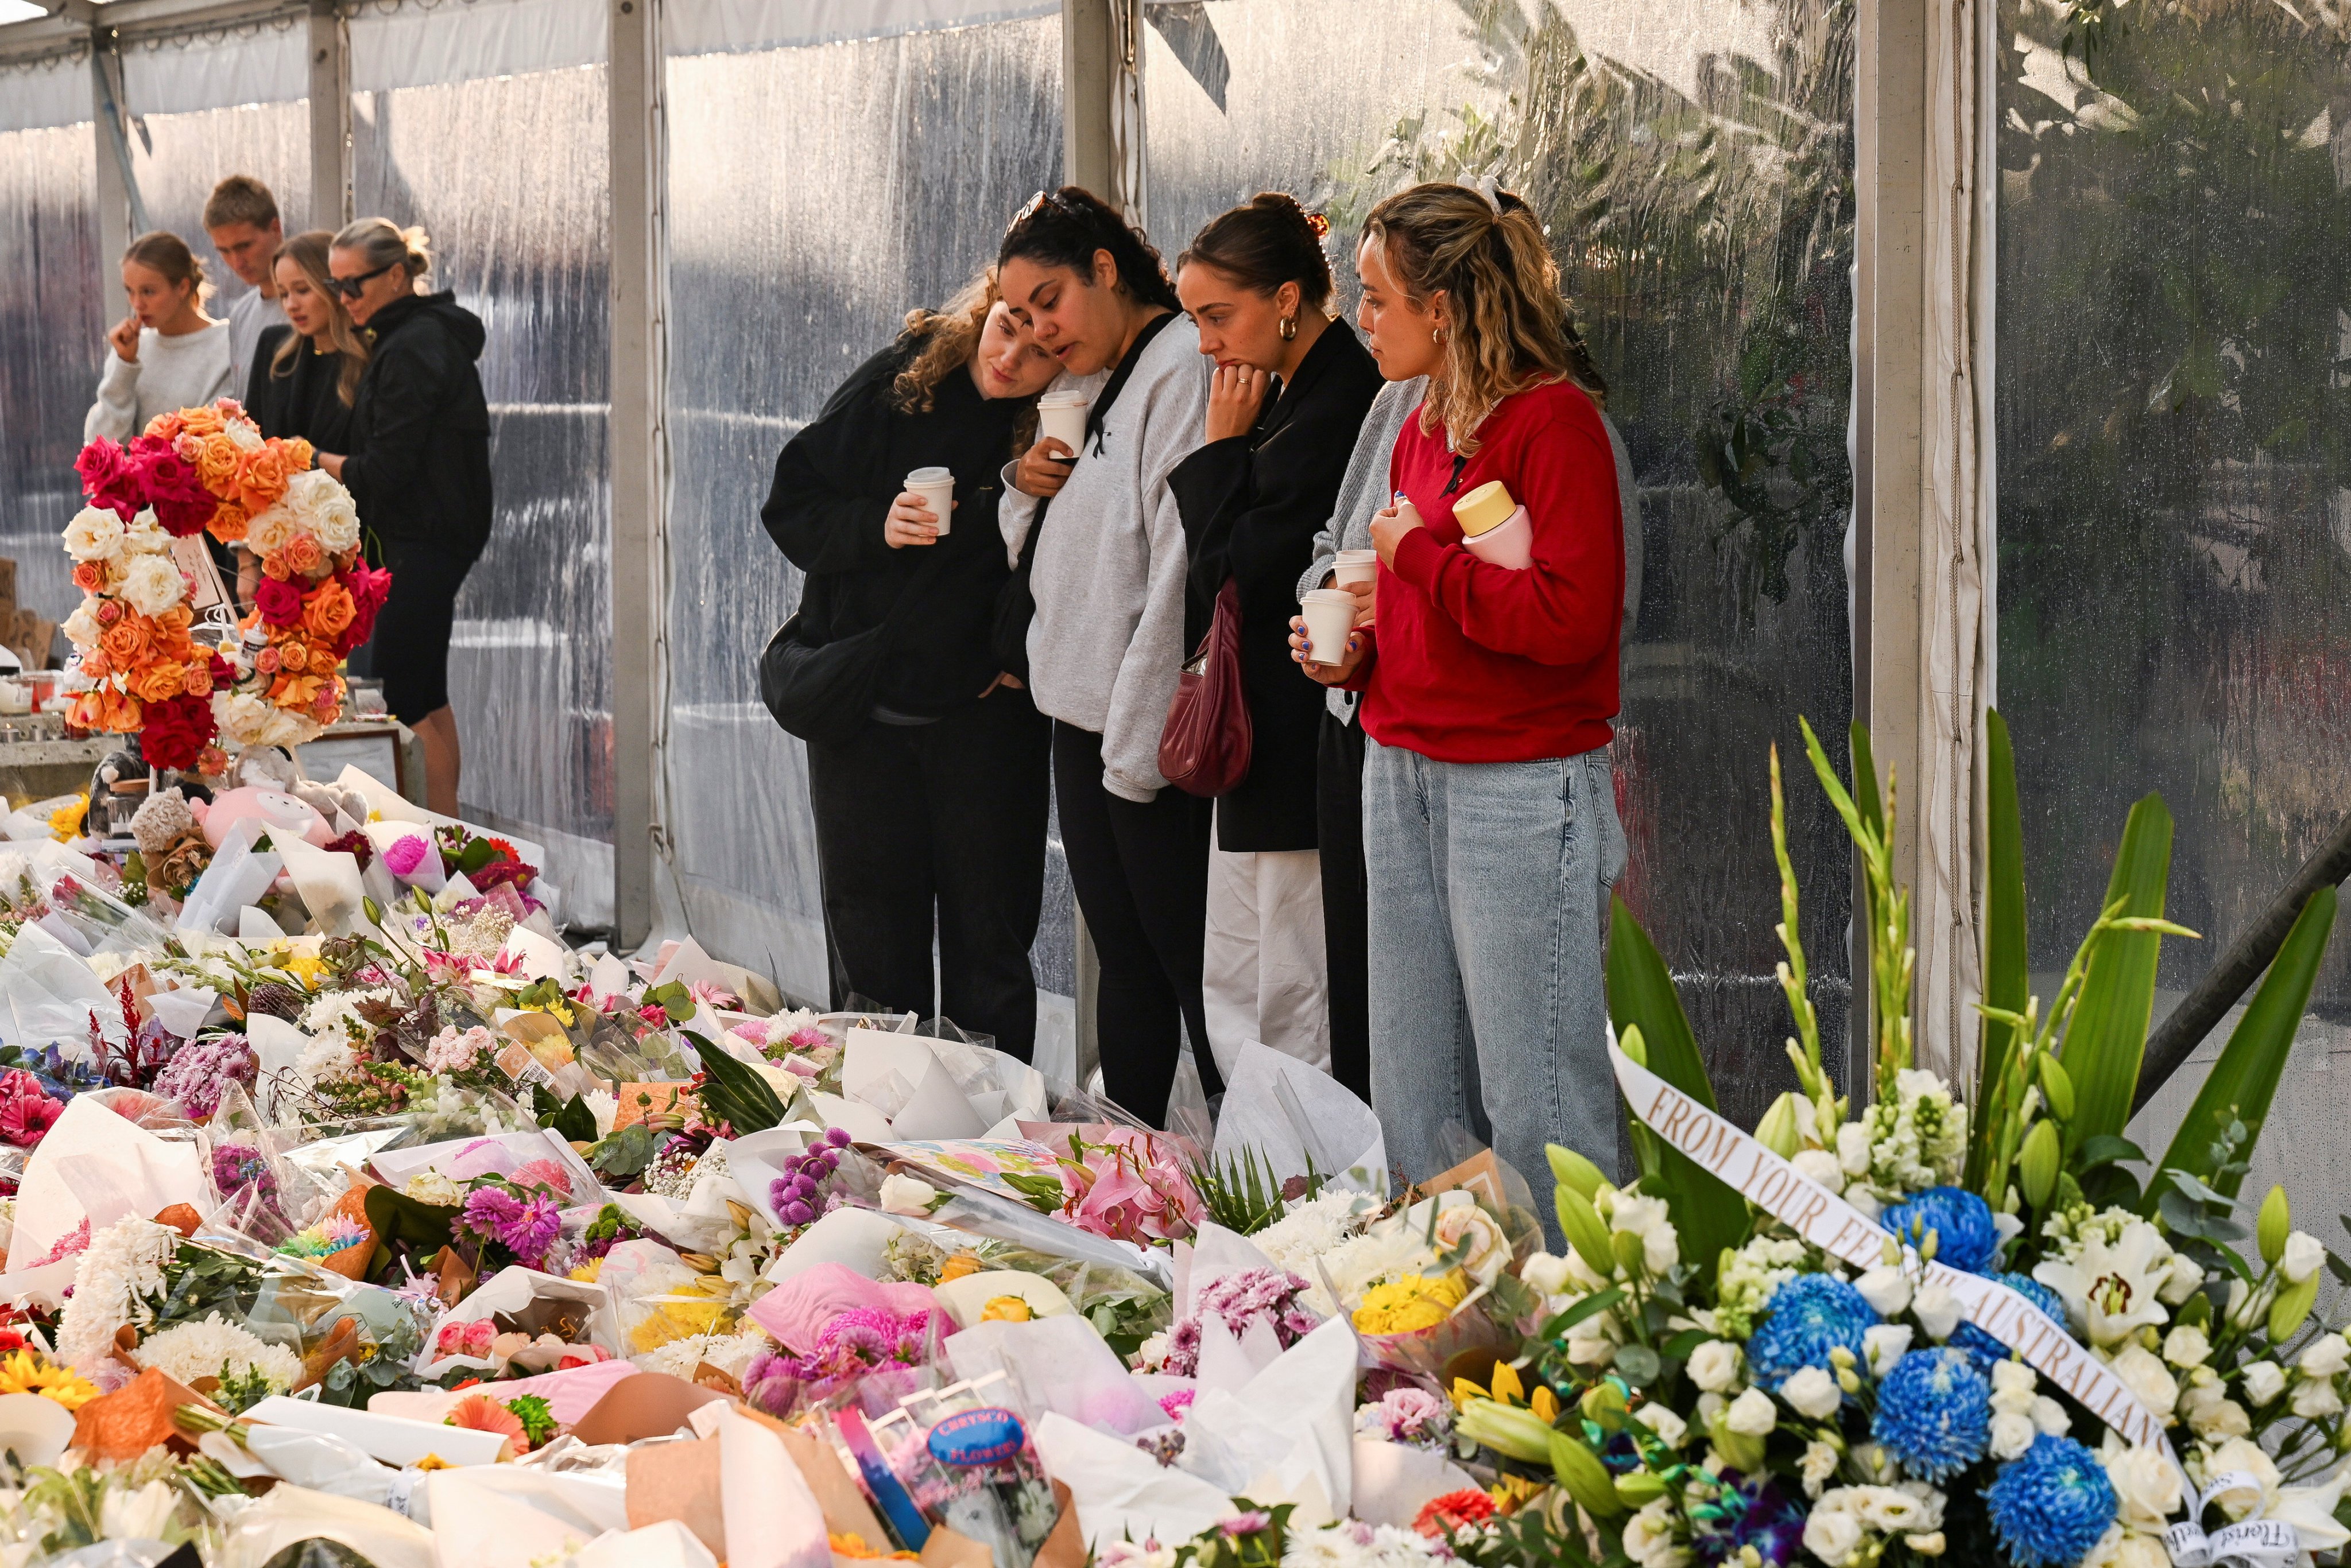 People on Thursday view the floral tributes for victims of the stabbing attacks which killed several people at the Westfield Bondi Junction shopping centre in Sydney, Australia. Photo: Reuters